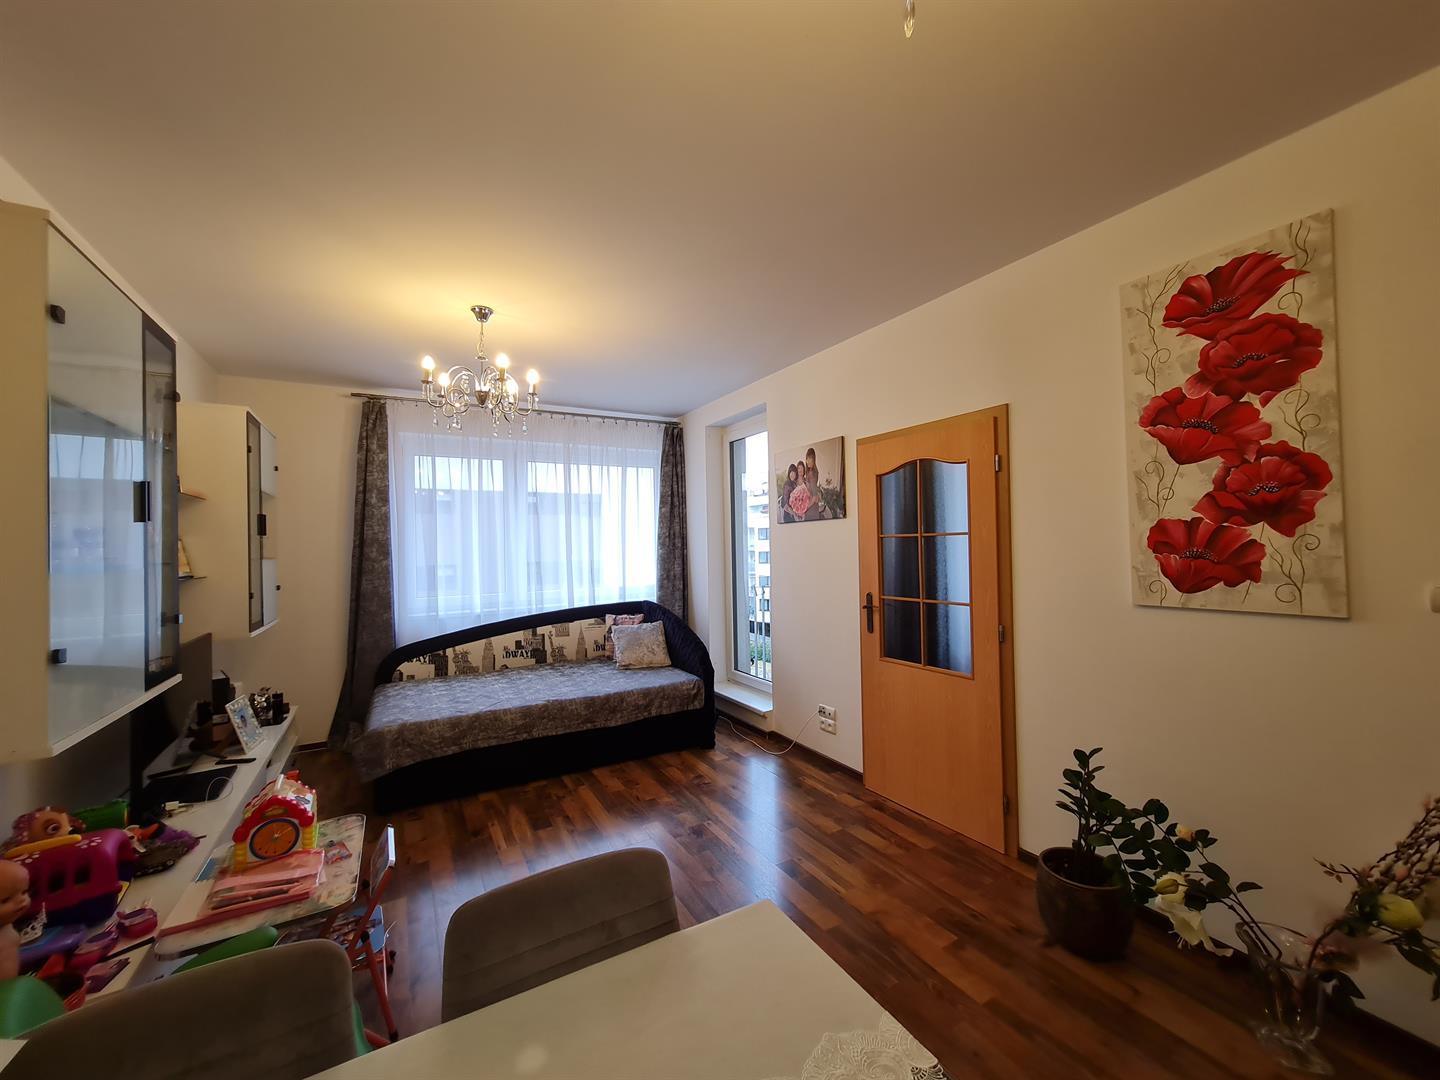 We exclusively offer for sale a spacious 2+kk 51.2 m2 apartment with a 4.3 m2 balcony a Střížkov